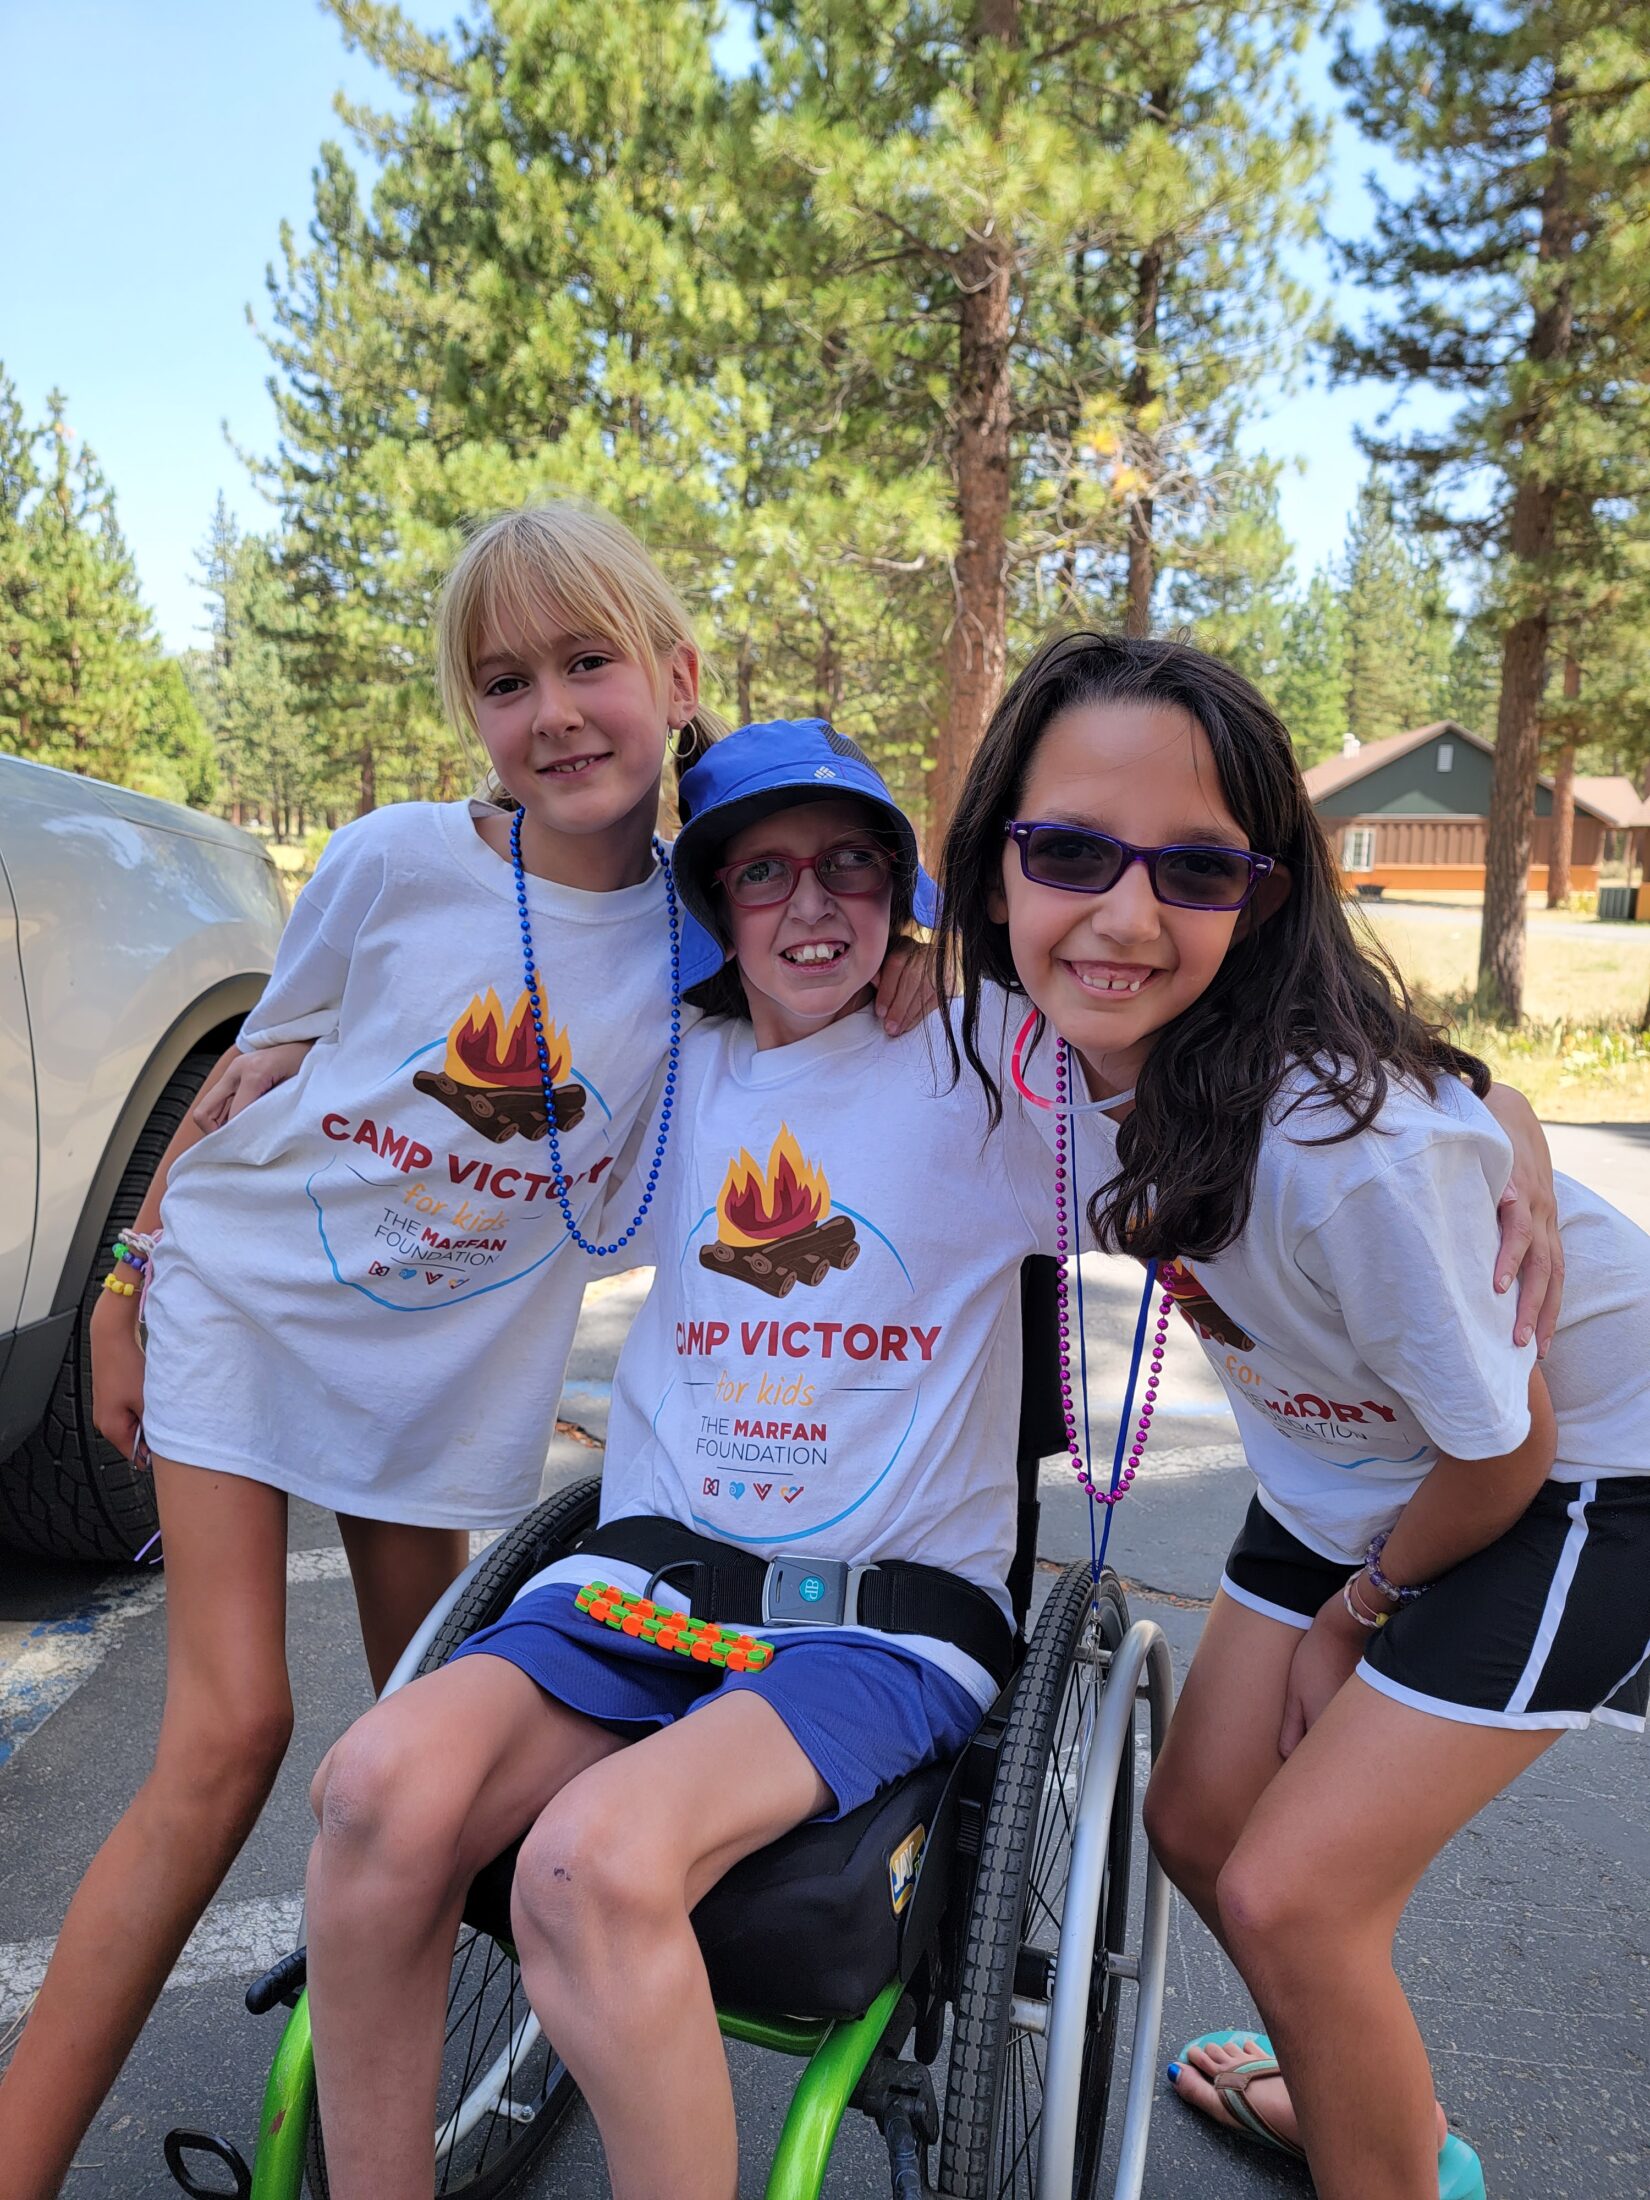 three kids, two standing, one in seated in wheelchair, huddled together and smiling while wearing matching camp victory t-shirts surrounded by trees